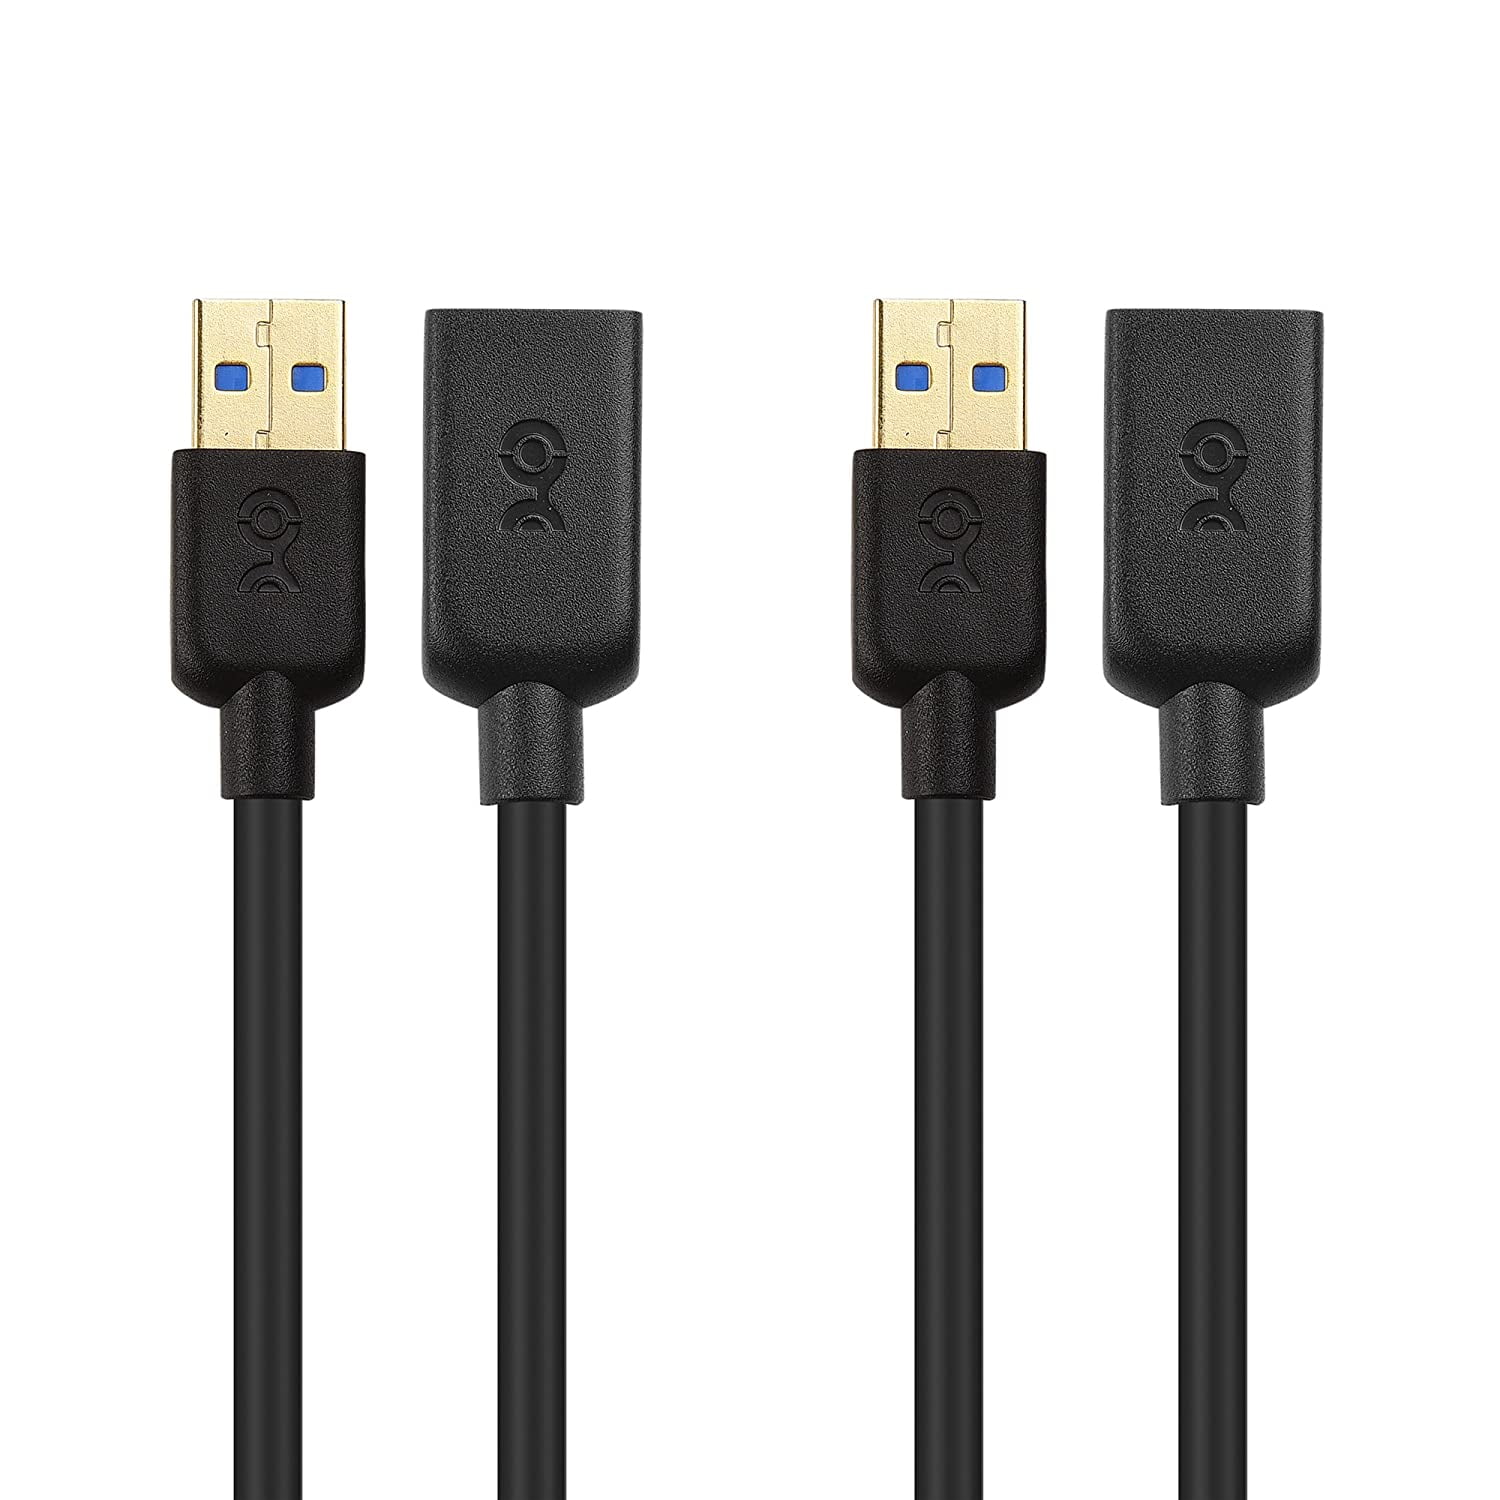 oculus headset extension cable